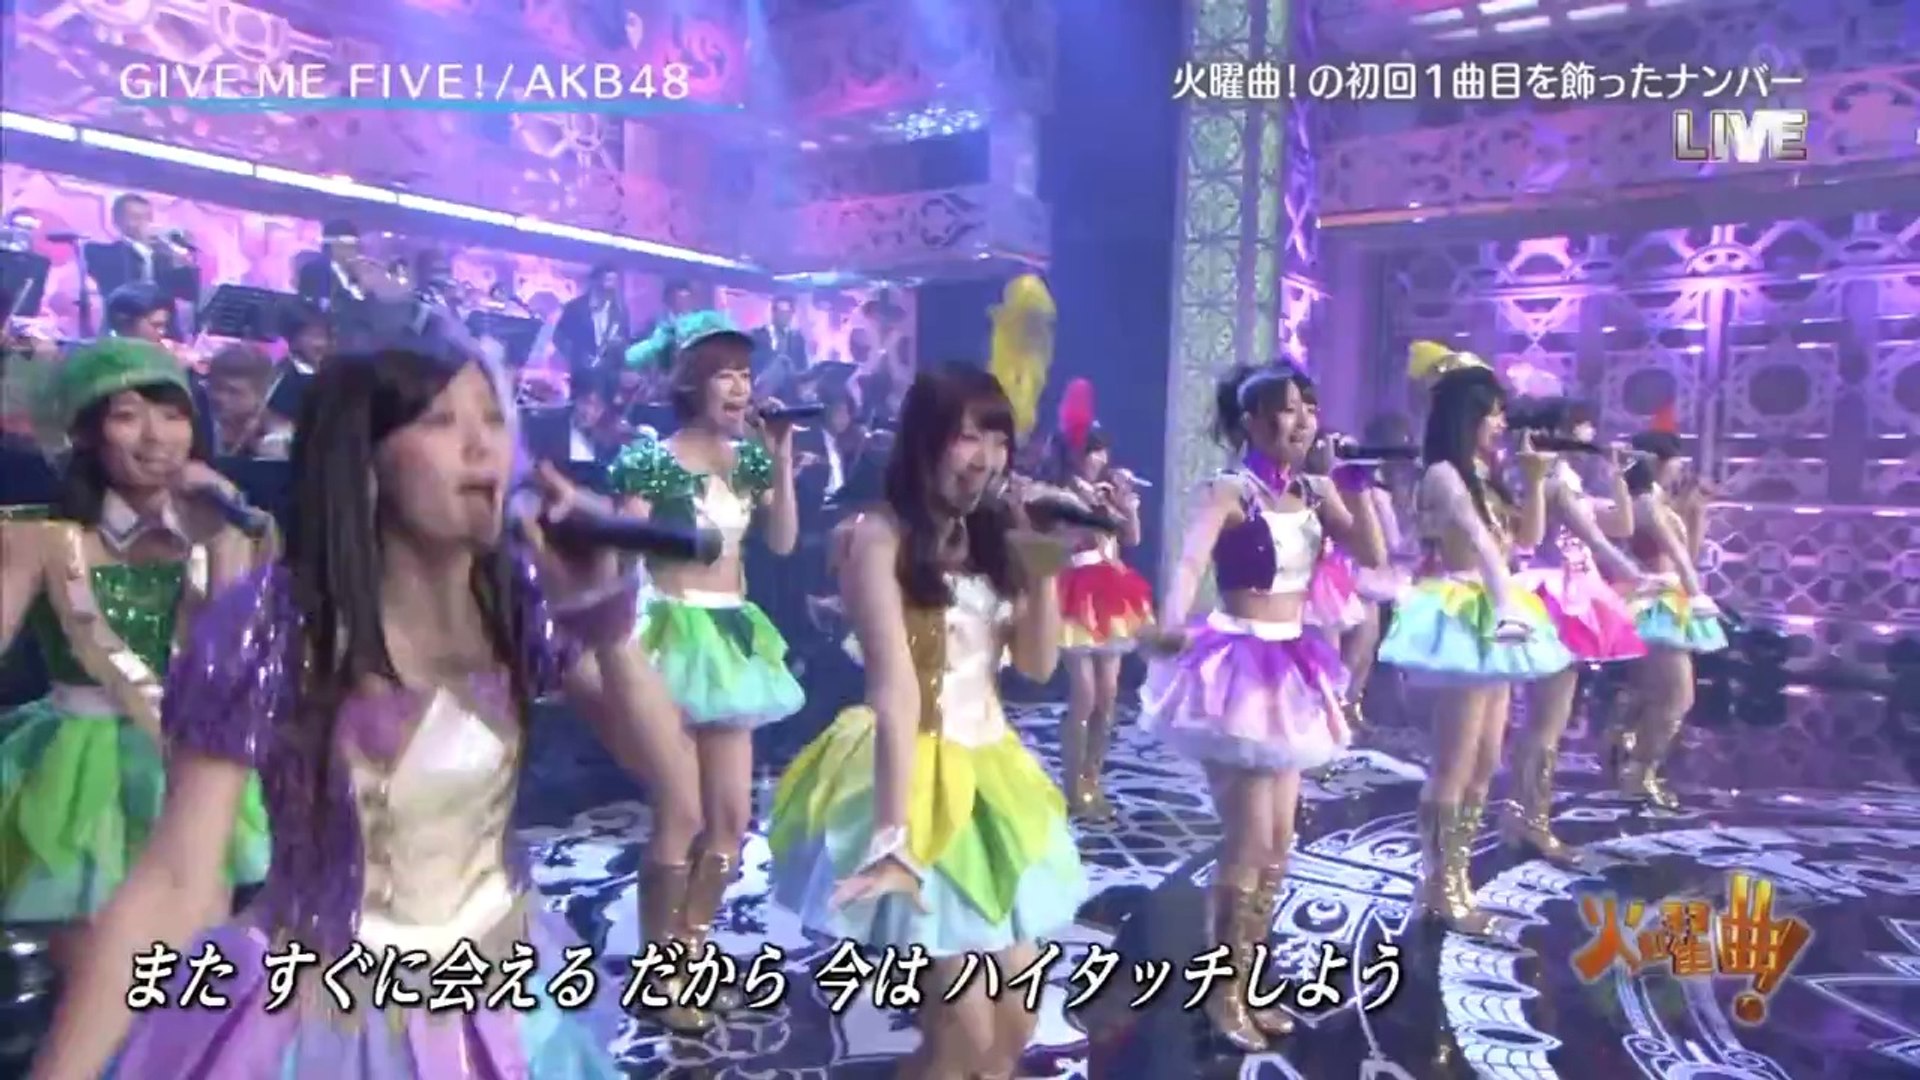 Live] AKB48 - Koisuru Fortune Cookie - Give Me Five 130903 - video  Dailymotion